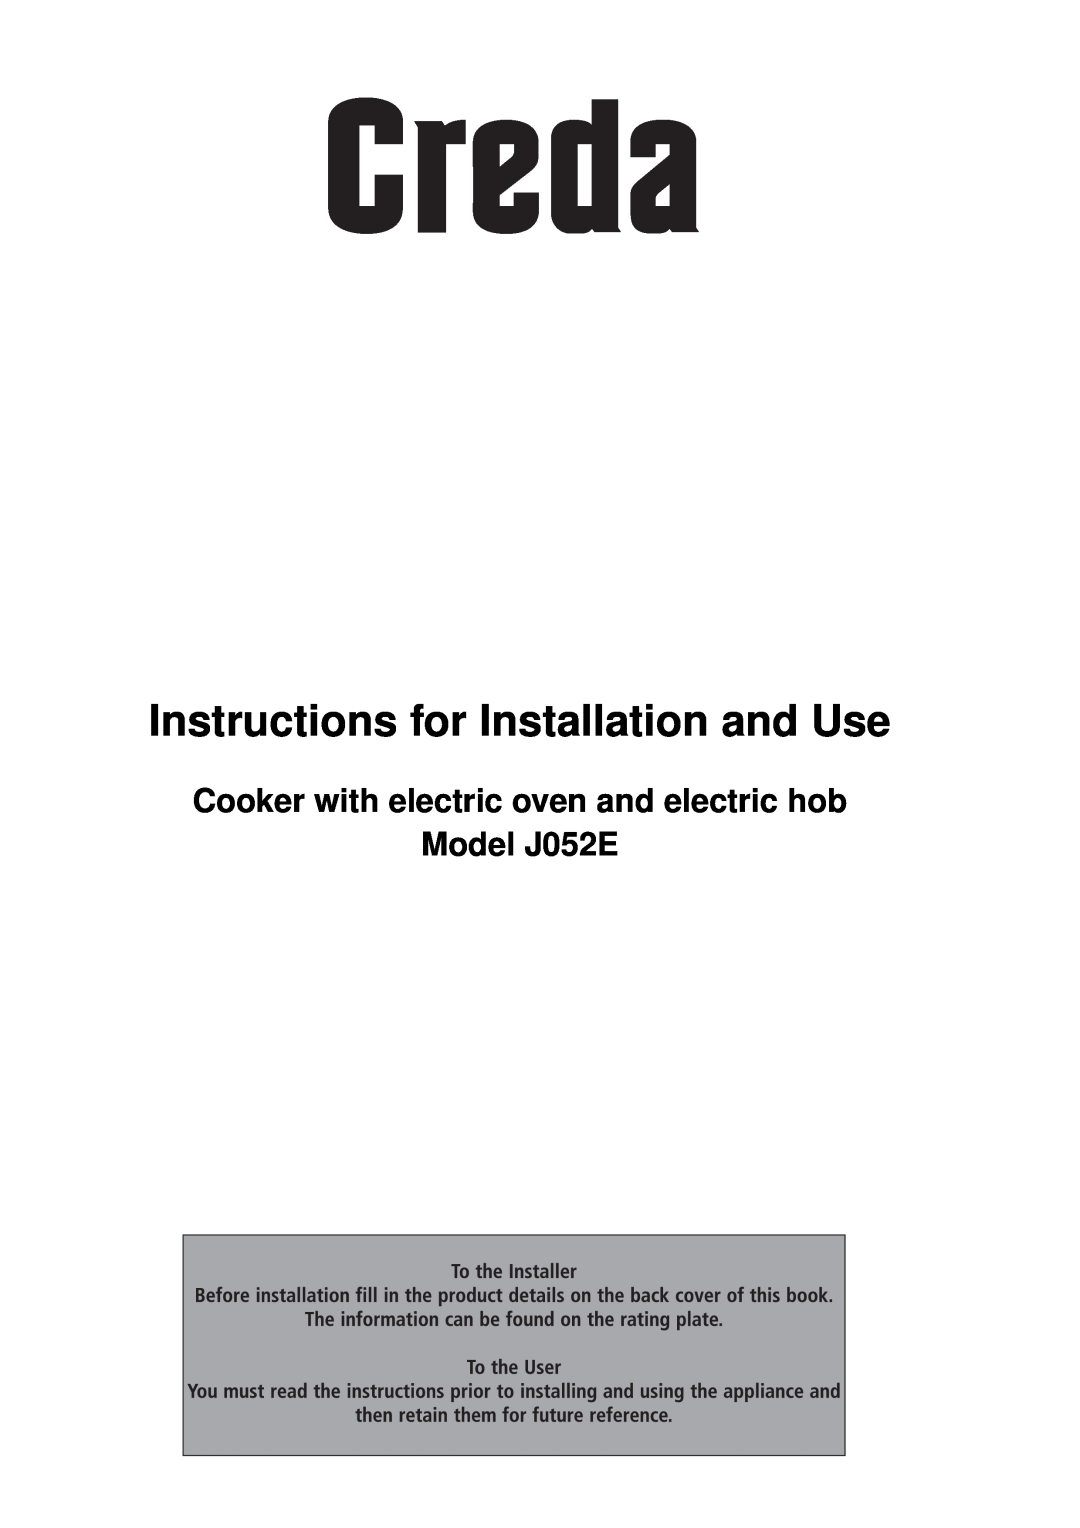 Creda manual Instructions for Installation and Use, Cooker with electric oven and electric hob Model J052E 